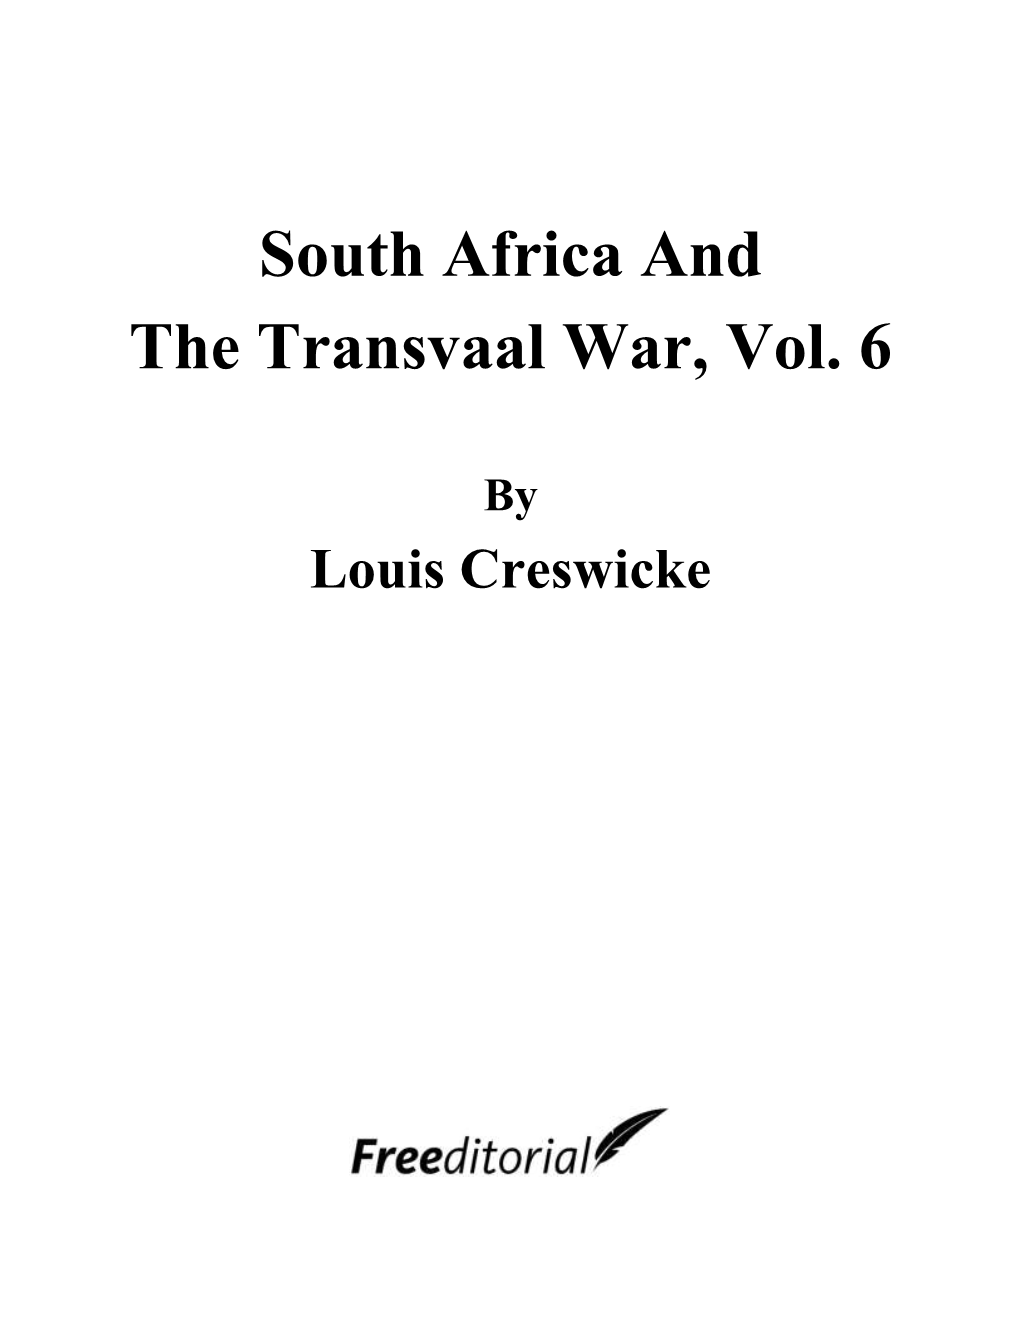 South Africa and the Transvaal War, Vol. 6